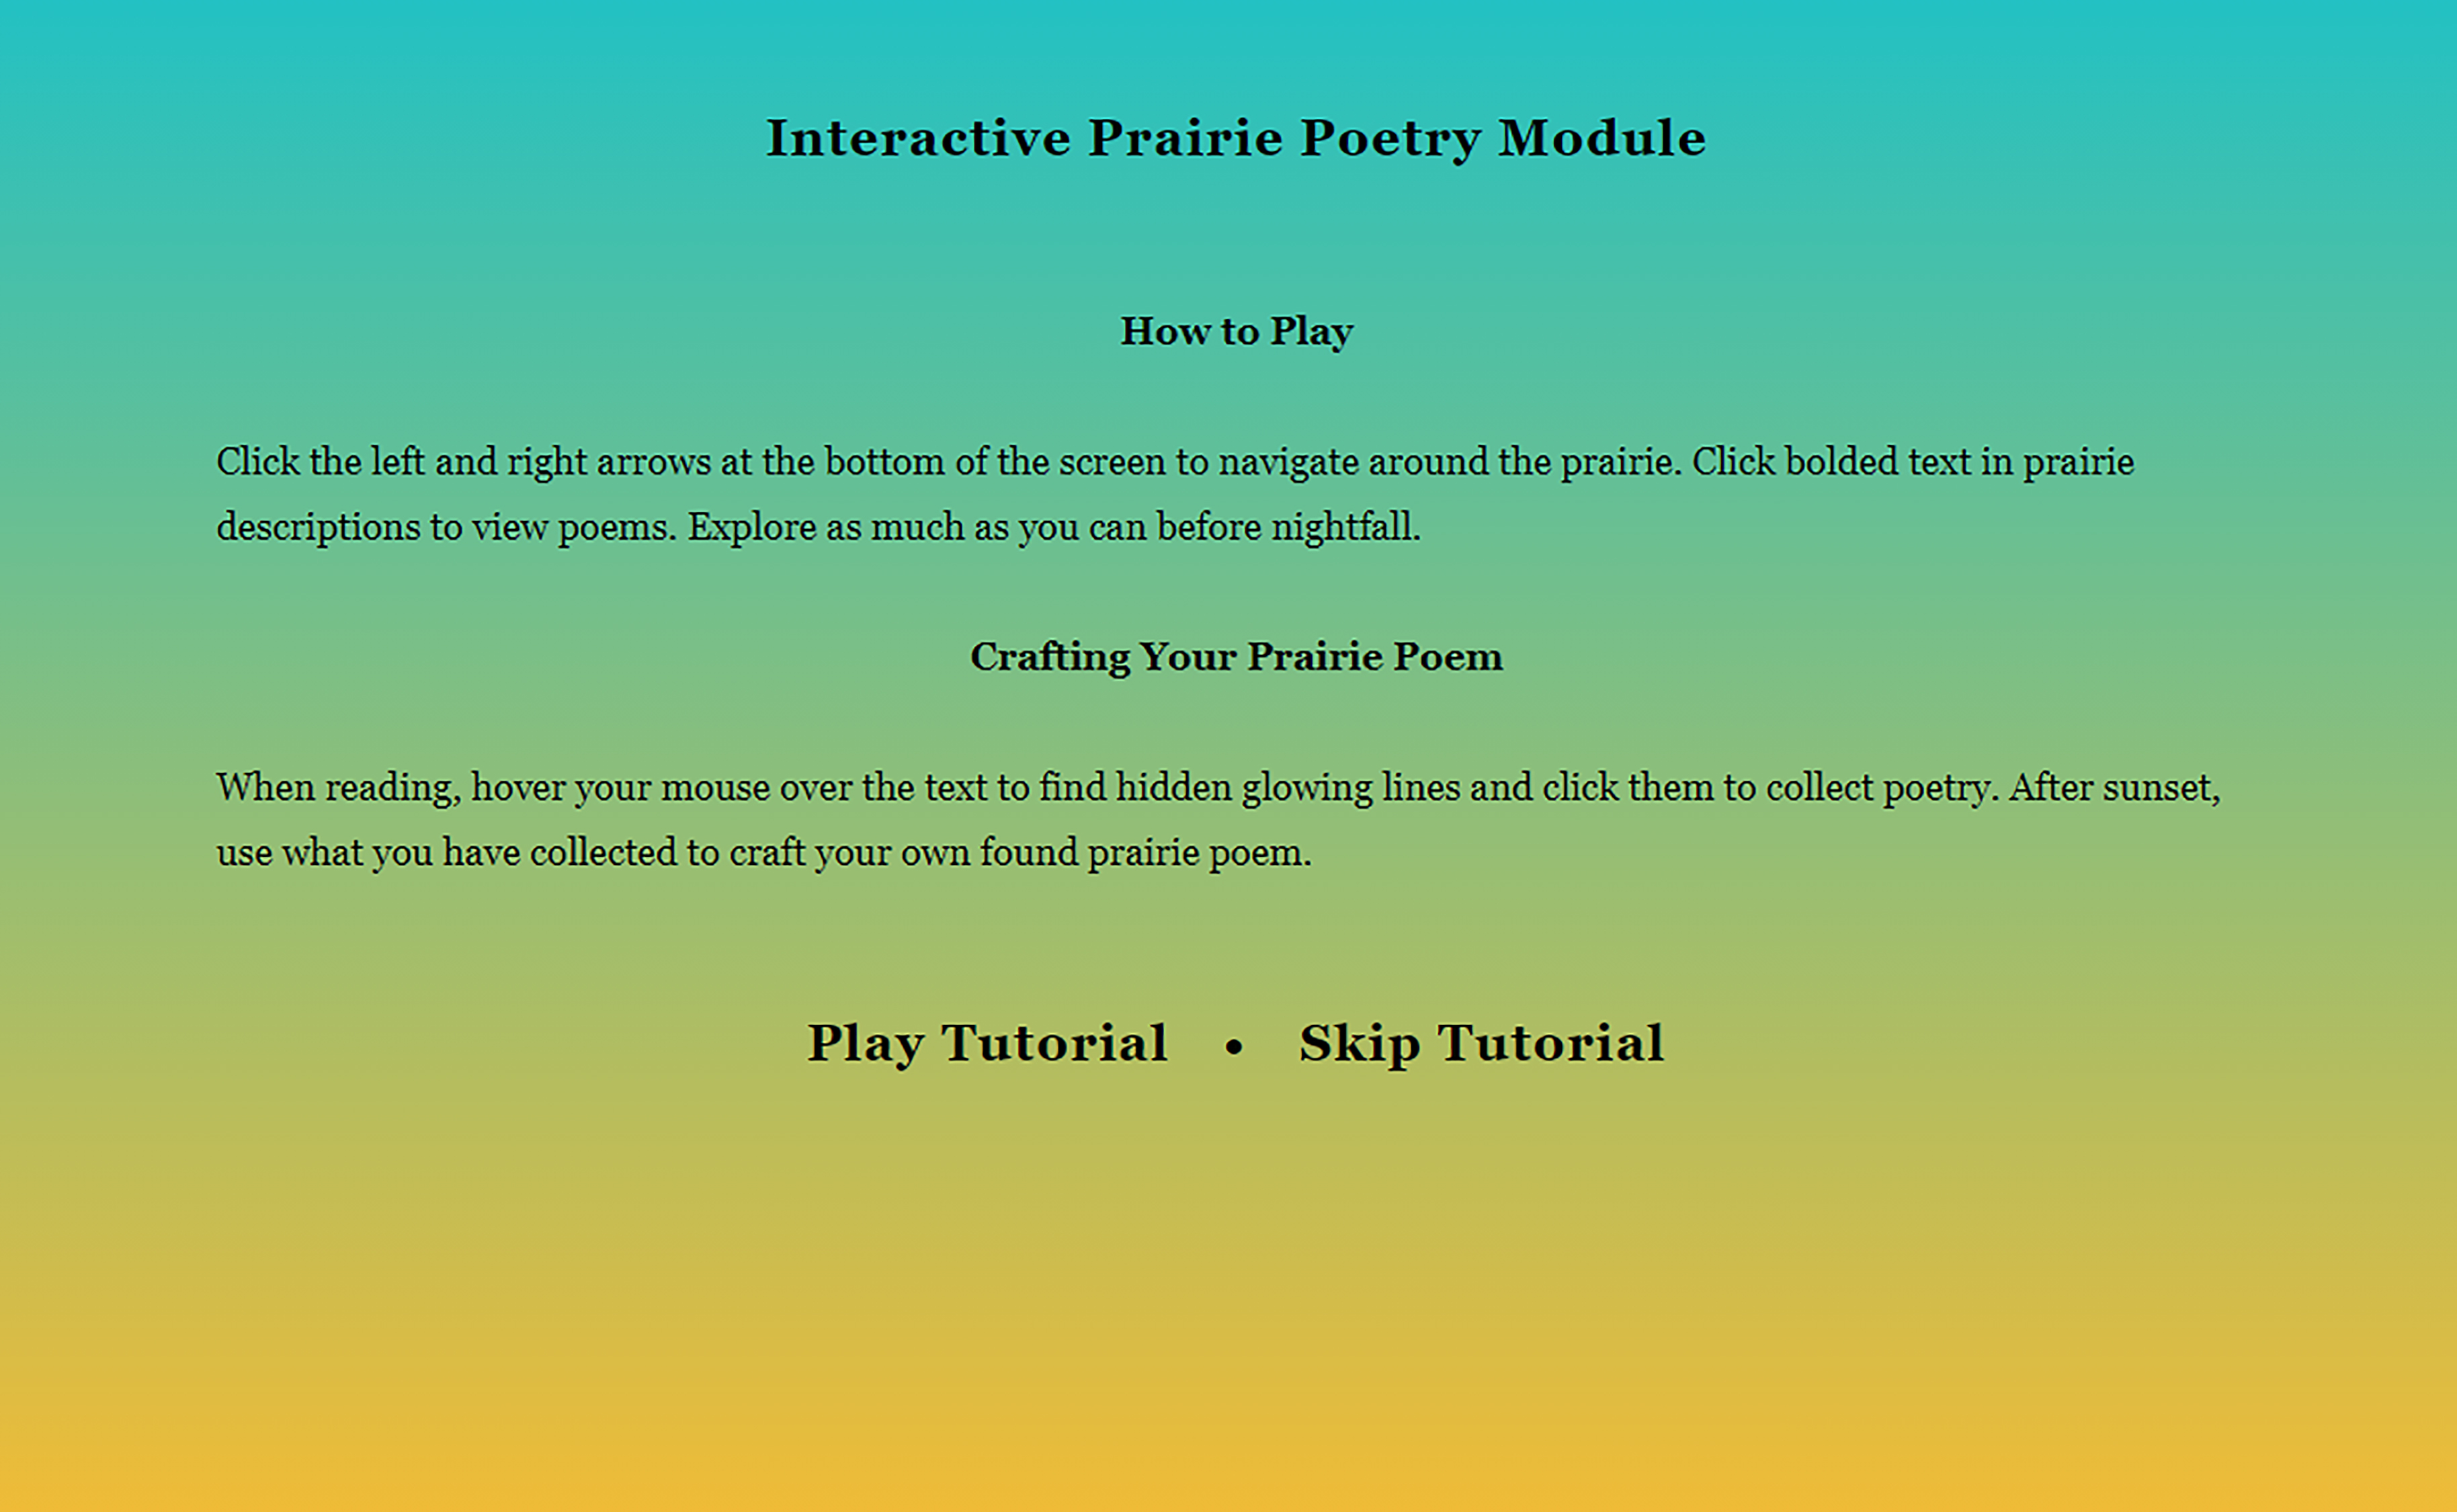 Click the image above to play the Interactive Prairie Poetry Module